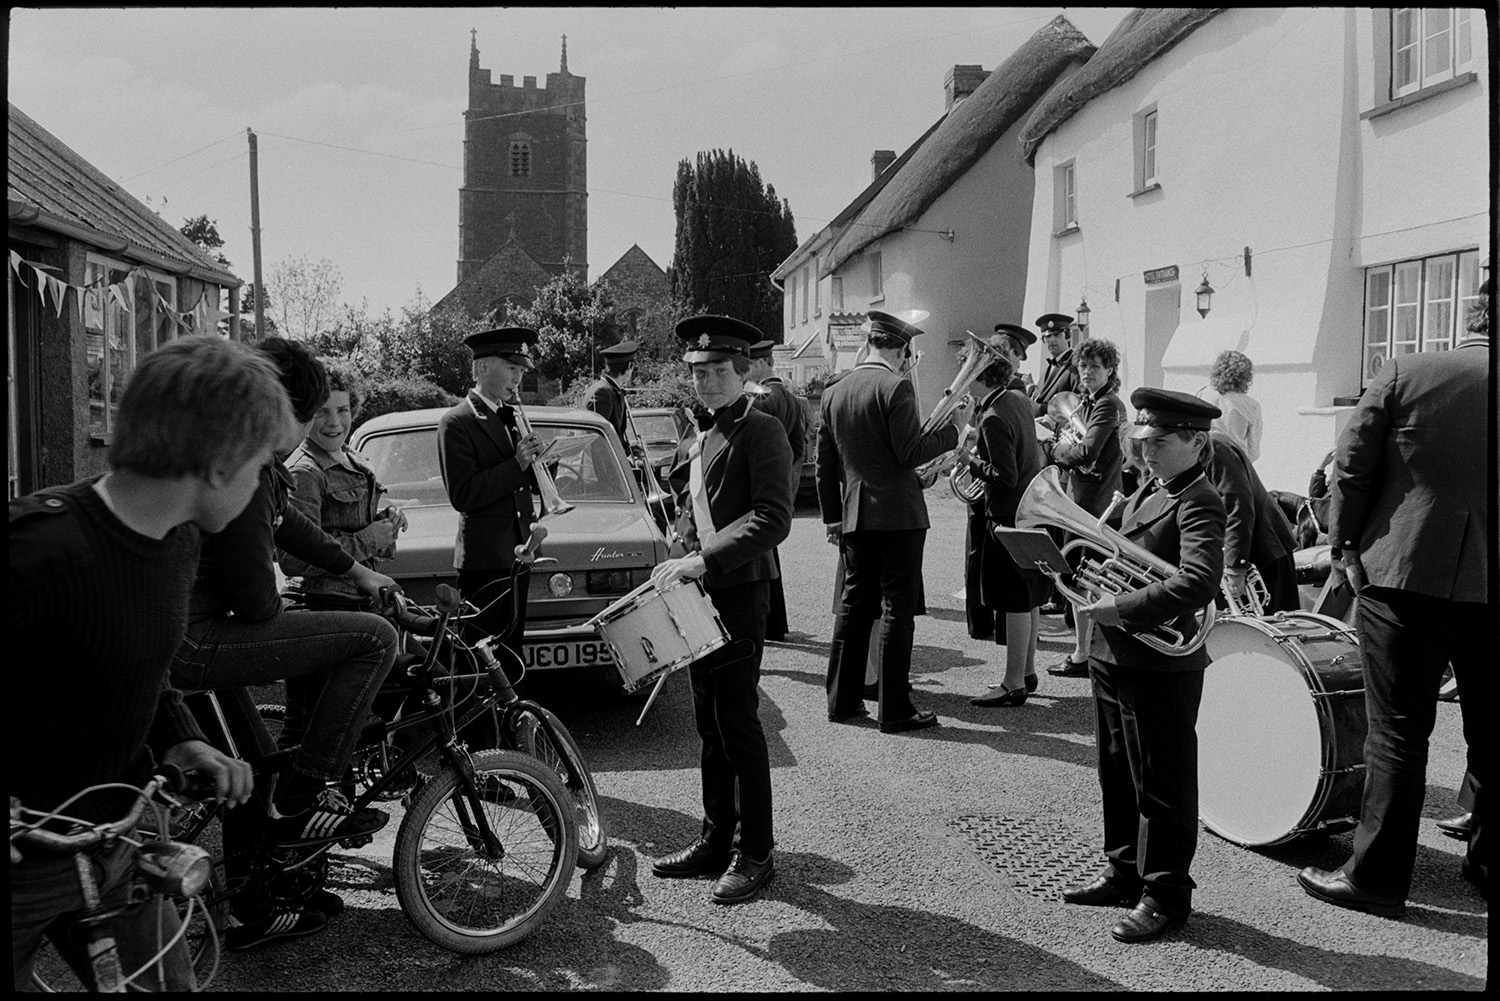 Club Day, people waiting before parade, drinking, playing cards. Boys on bicycles looking on.
[Members of the Hatherleigh Silver Band and boys on bicycles gathered outside the Duke of York Inn on Iddesleigh Club Day, before the Club Day parade. A Hillman Hunter car is parked in the street and Iddesleigh Church can be seen in the background.]